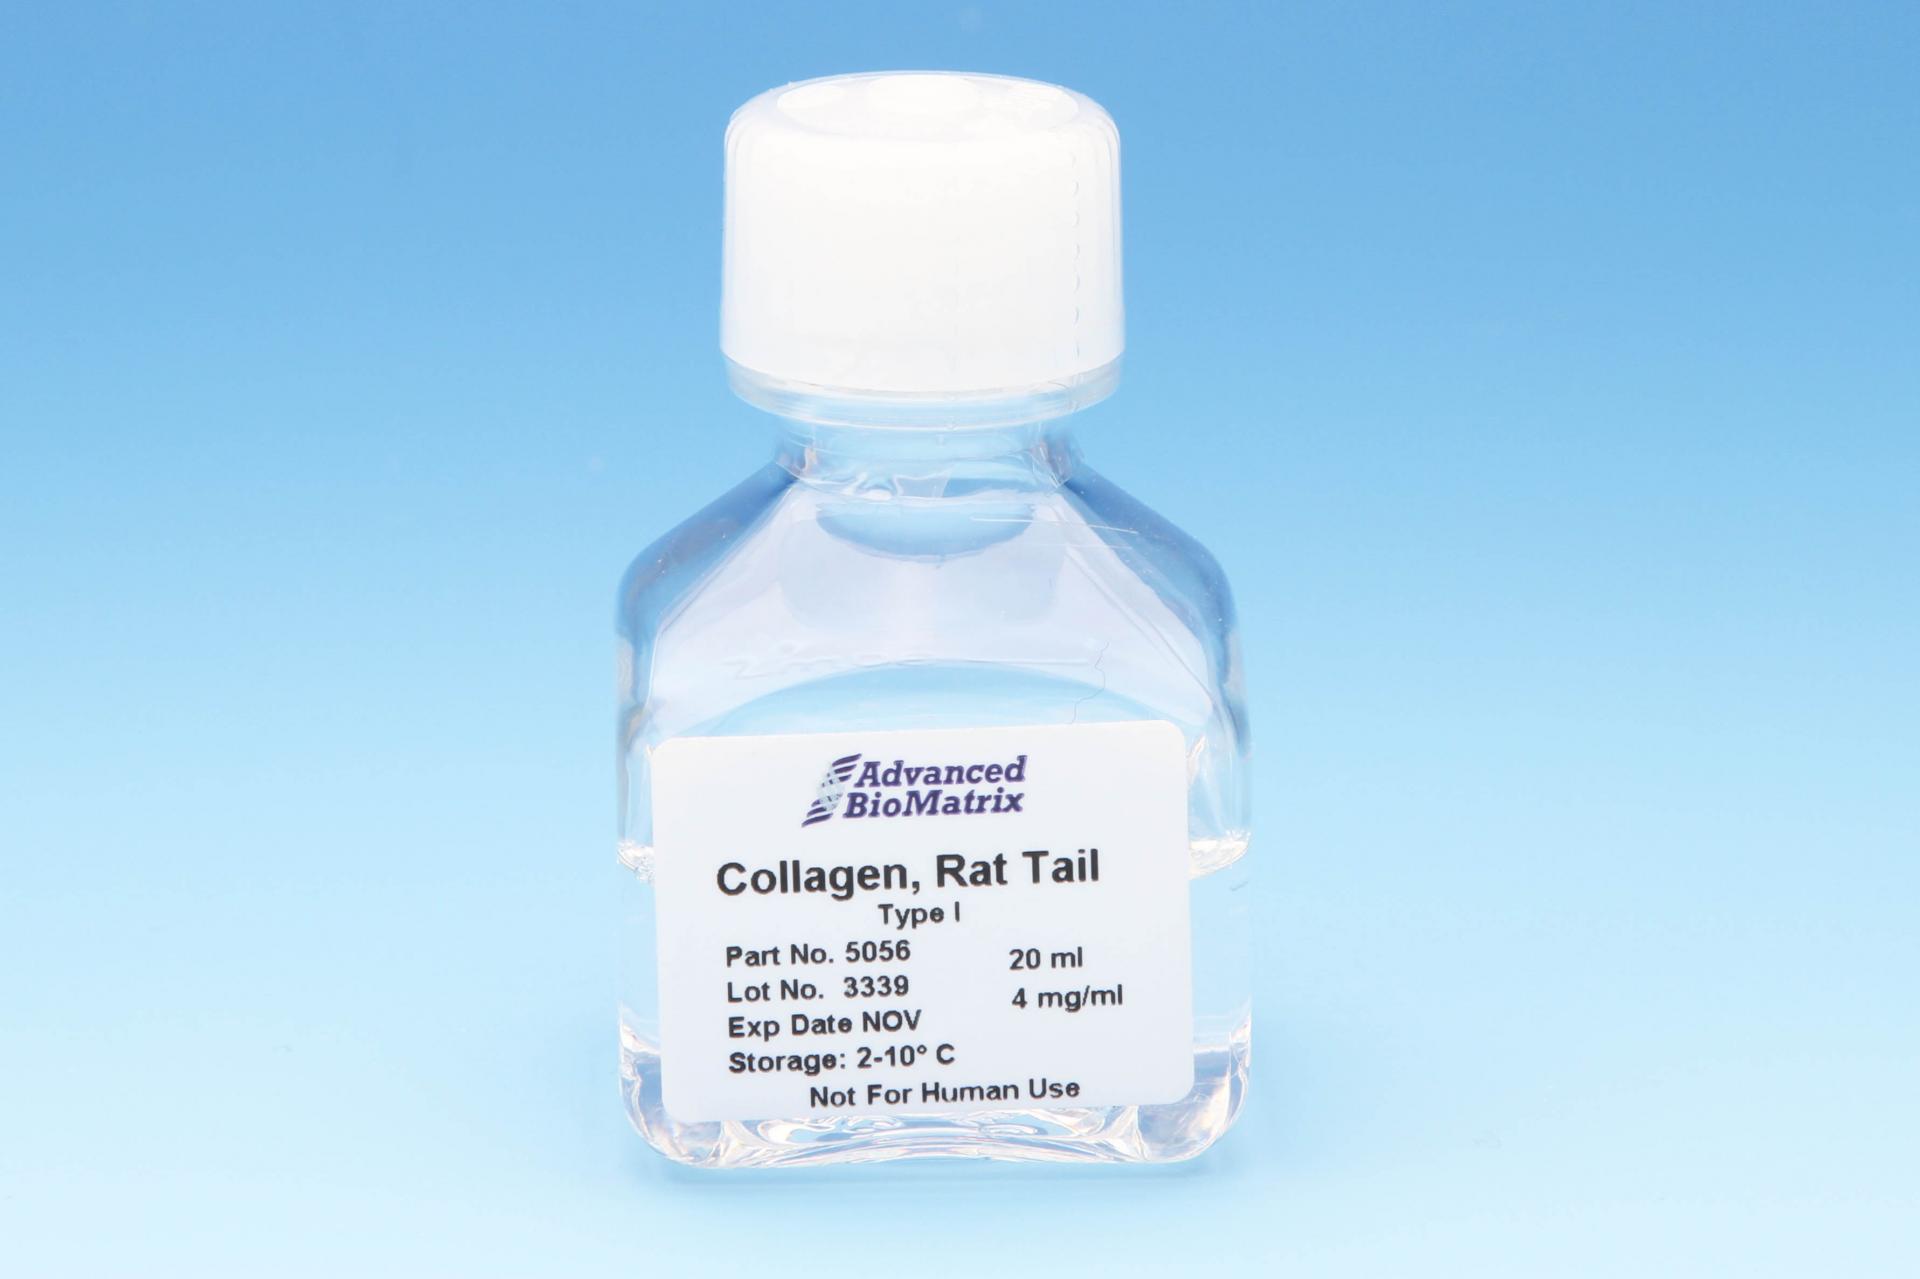 RatCol® for Coatings, Solution, 4 mg/ml (rat) #5056